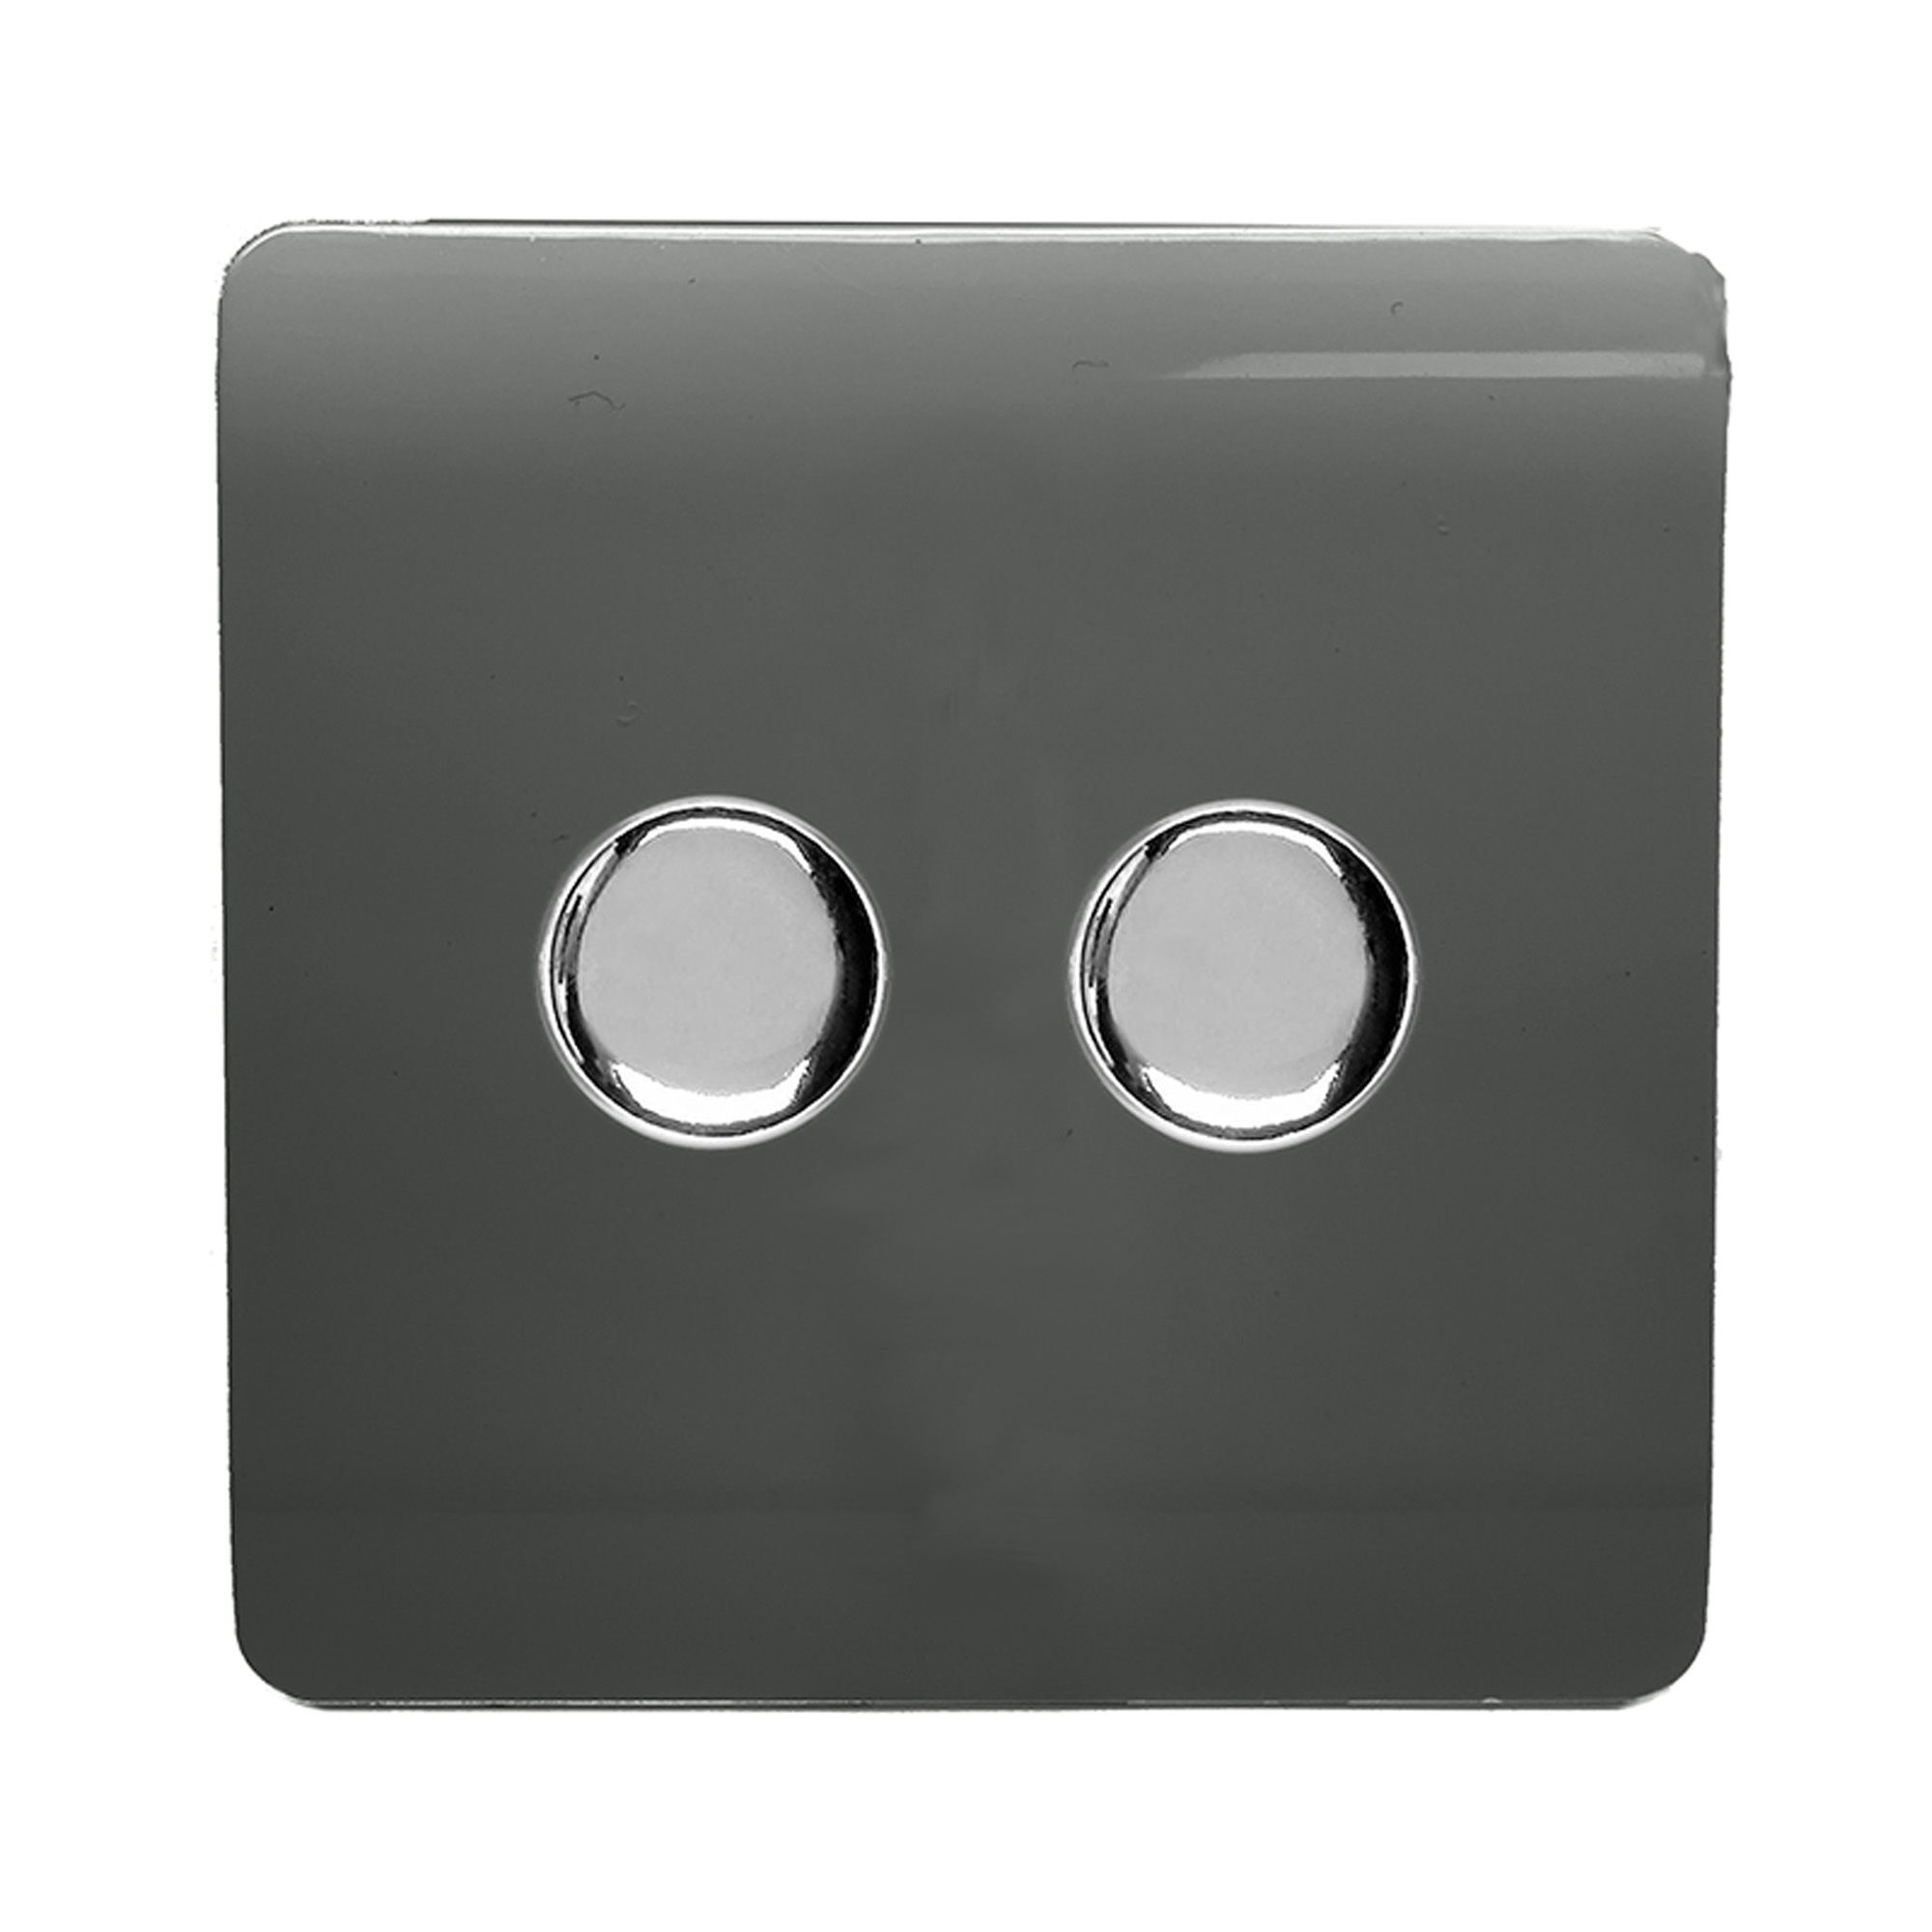 ART-2LDMCH  2 Gang 2 Way LED Dimmer Switch Charcoal